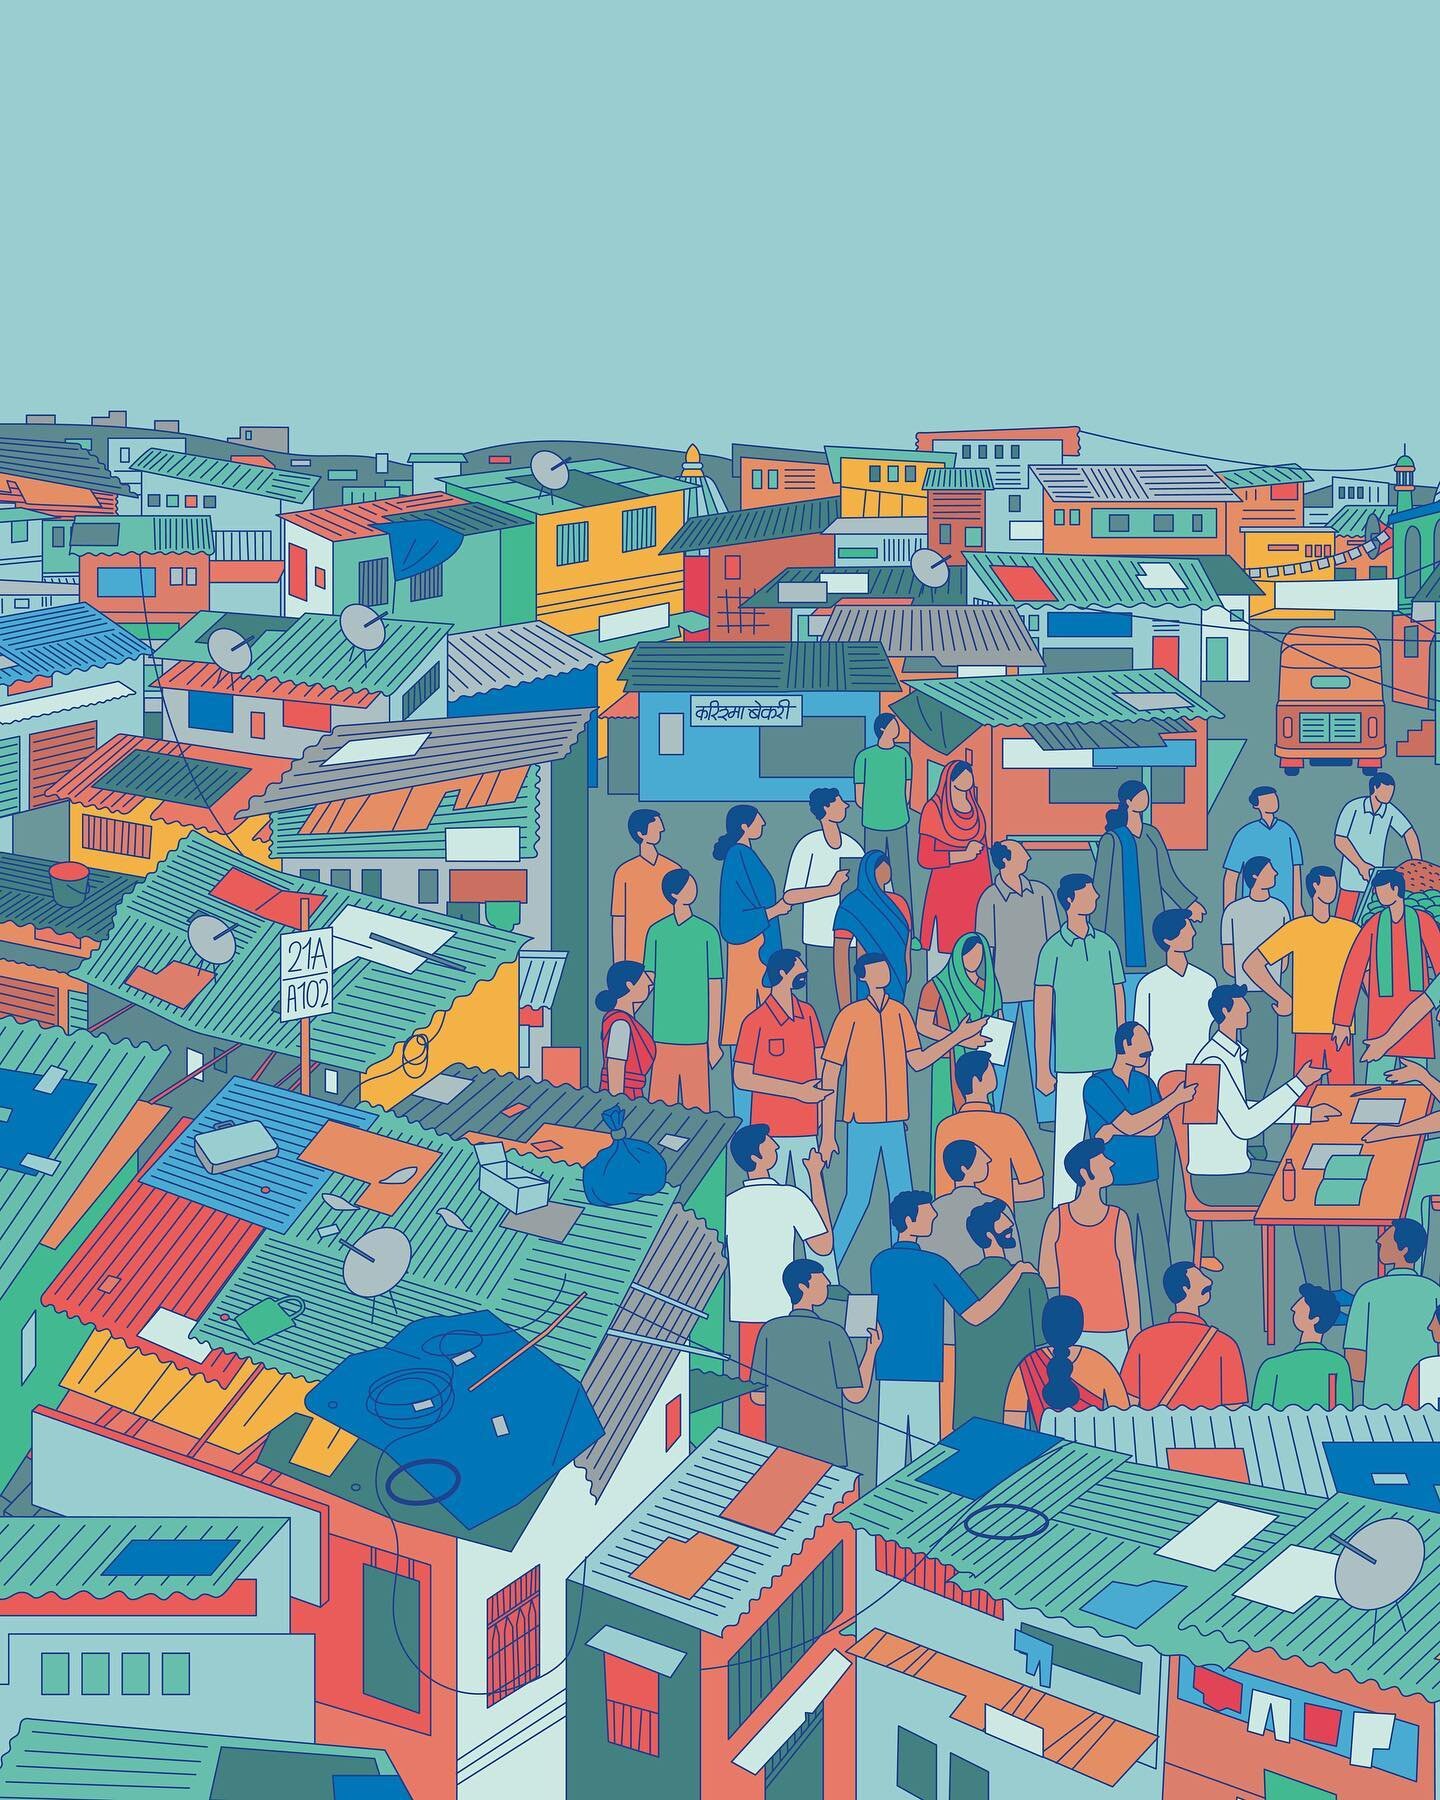 Cover illustration for the Book: Migrants and Machine Politics by @princetonupress Authors:&nbsp;Adam Michael Auerbach and Tariq Thachil. 

The cover illustrates a commonly seen scenario in slums just before elections, where political parties show th